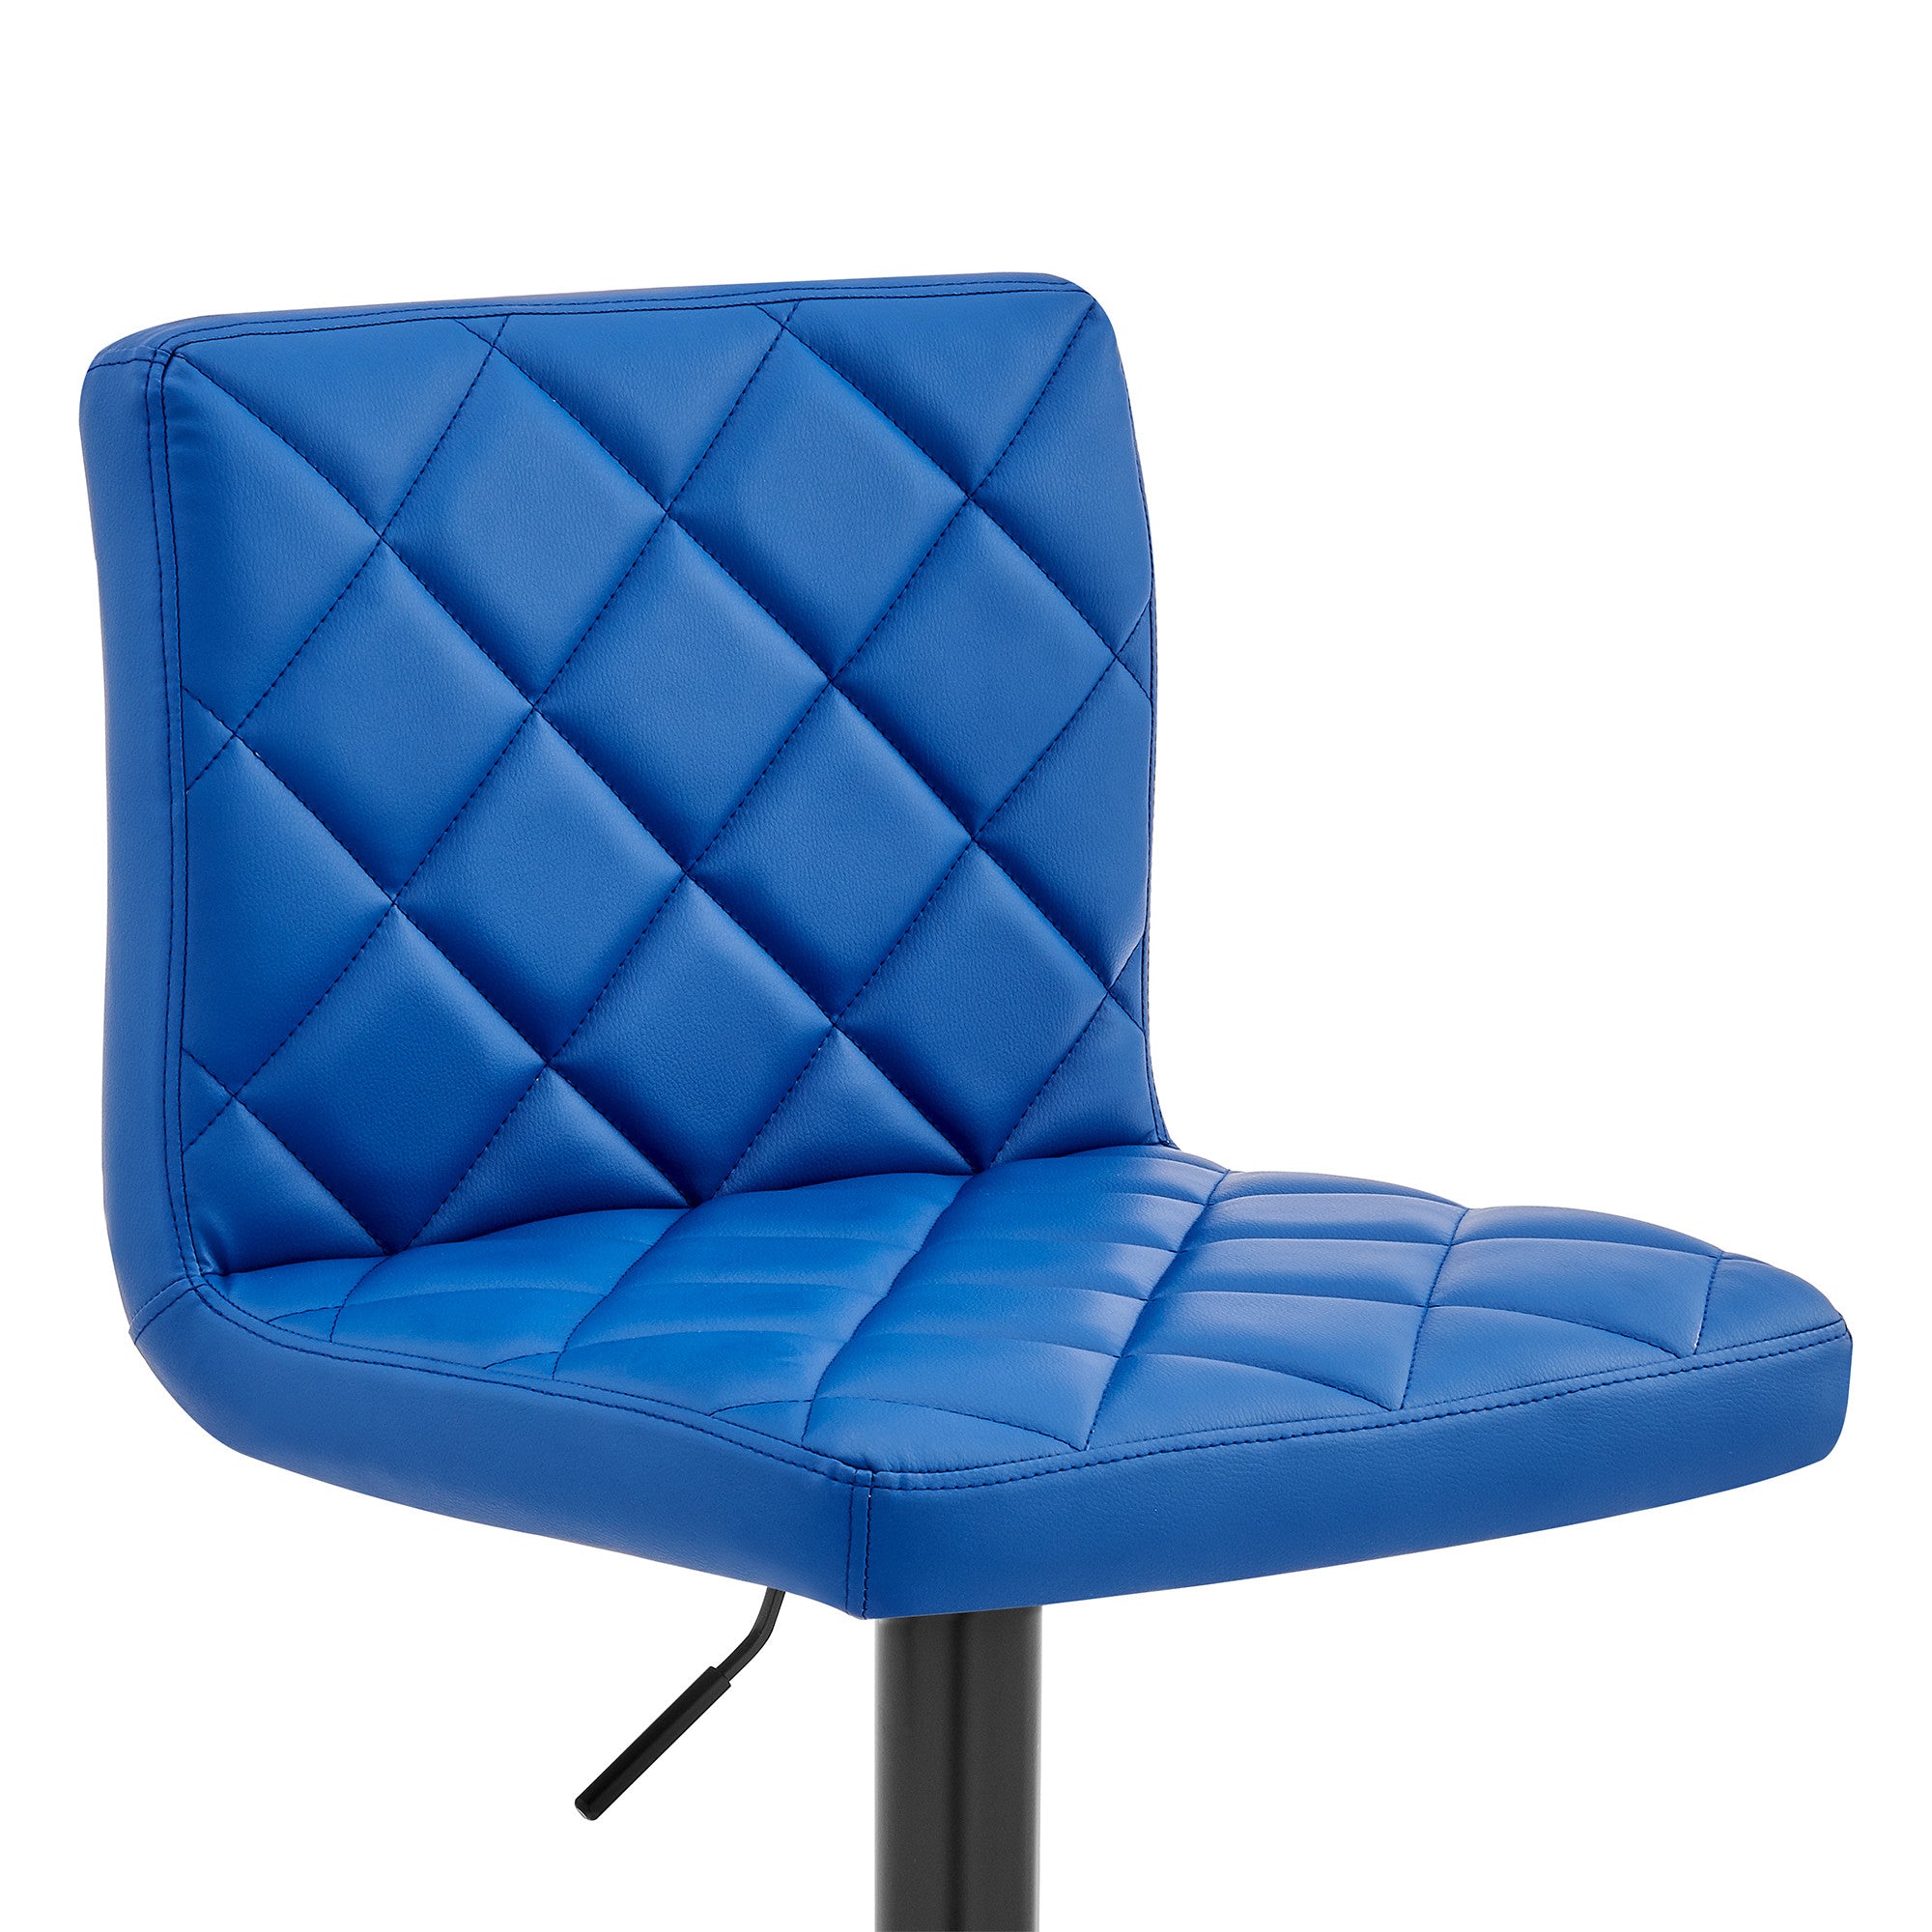 24" Blue And Black Iron Swivel Low Back Adjustable Height Bar Chair